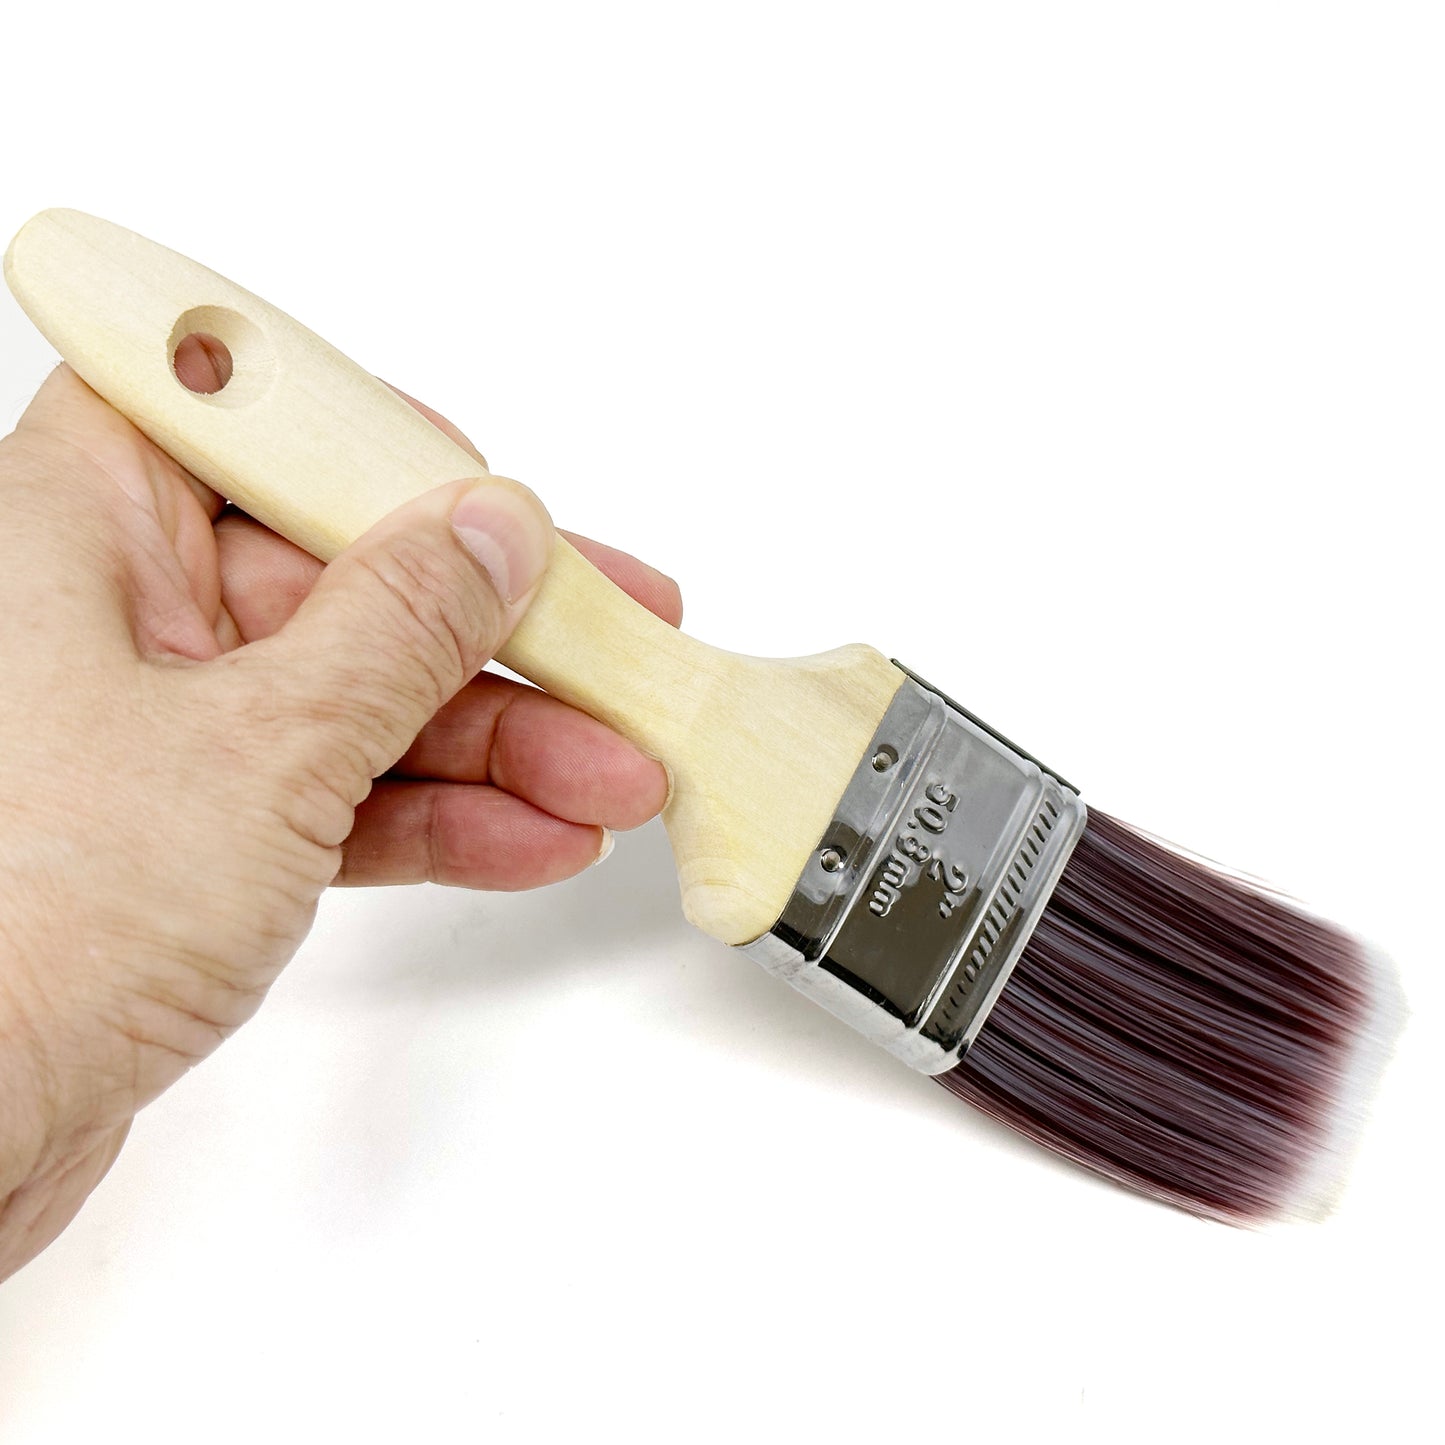 Allgala Paint Brushes 3-PK 1"+1.5"+2 Set for All Surface with Premium Wood Handle and Durable Filament Bristles